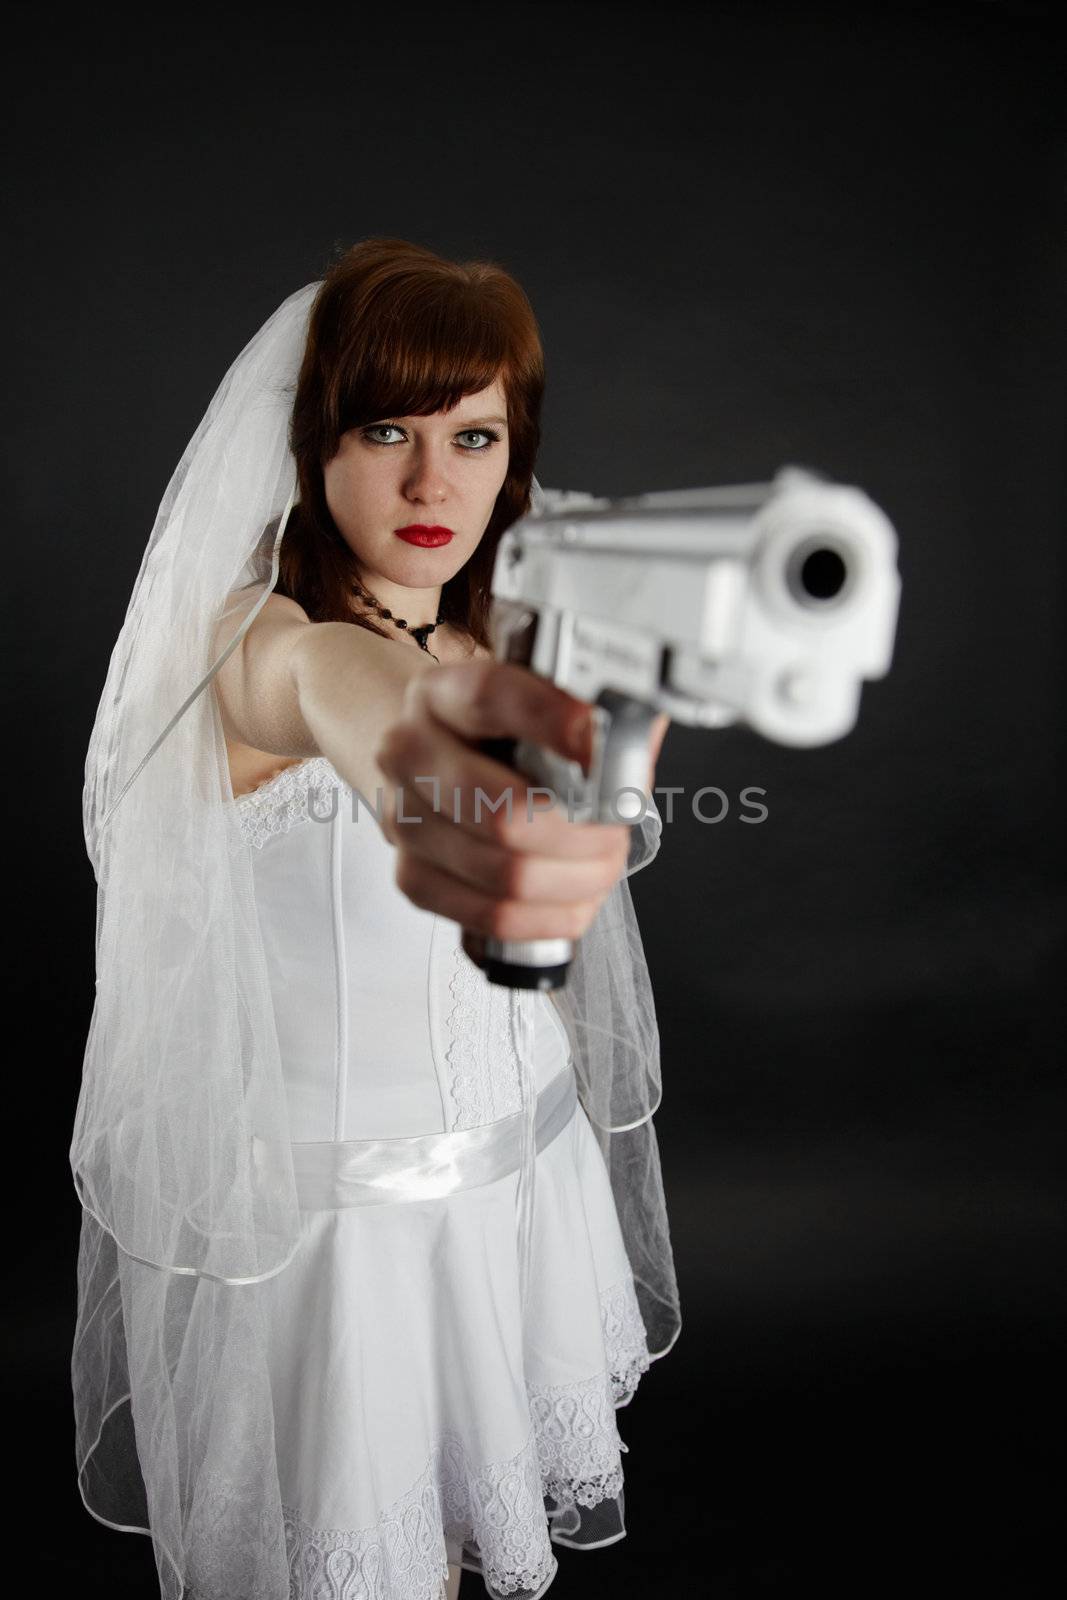 Serious bride take aim with a pistol by pzaxe